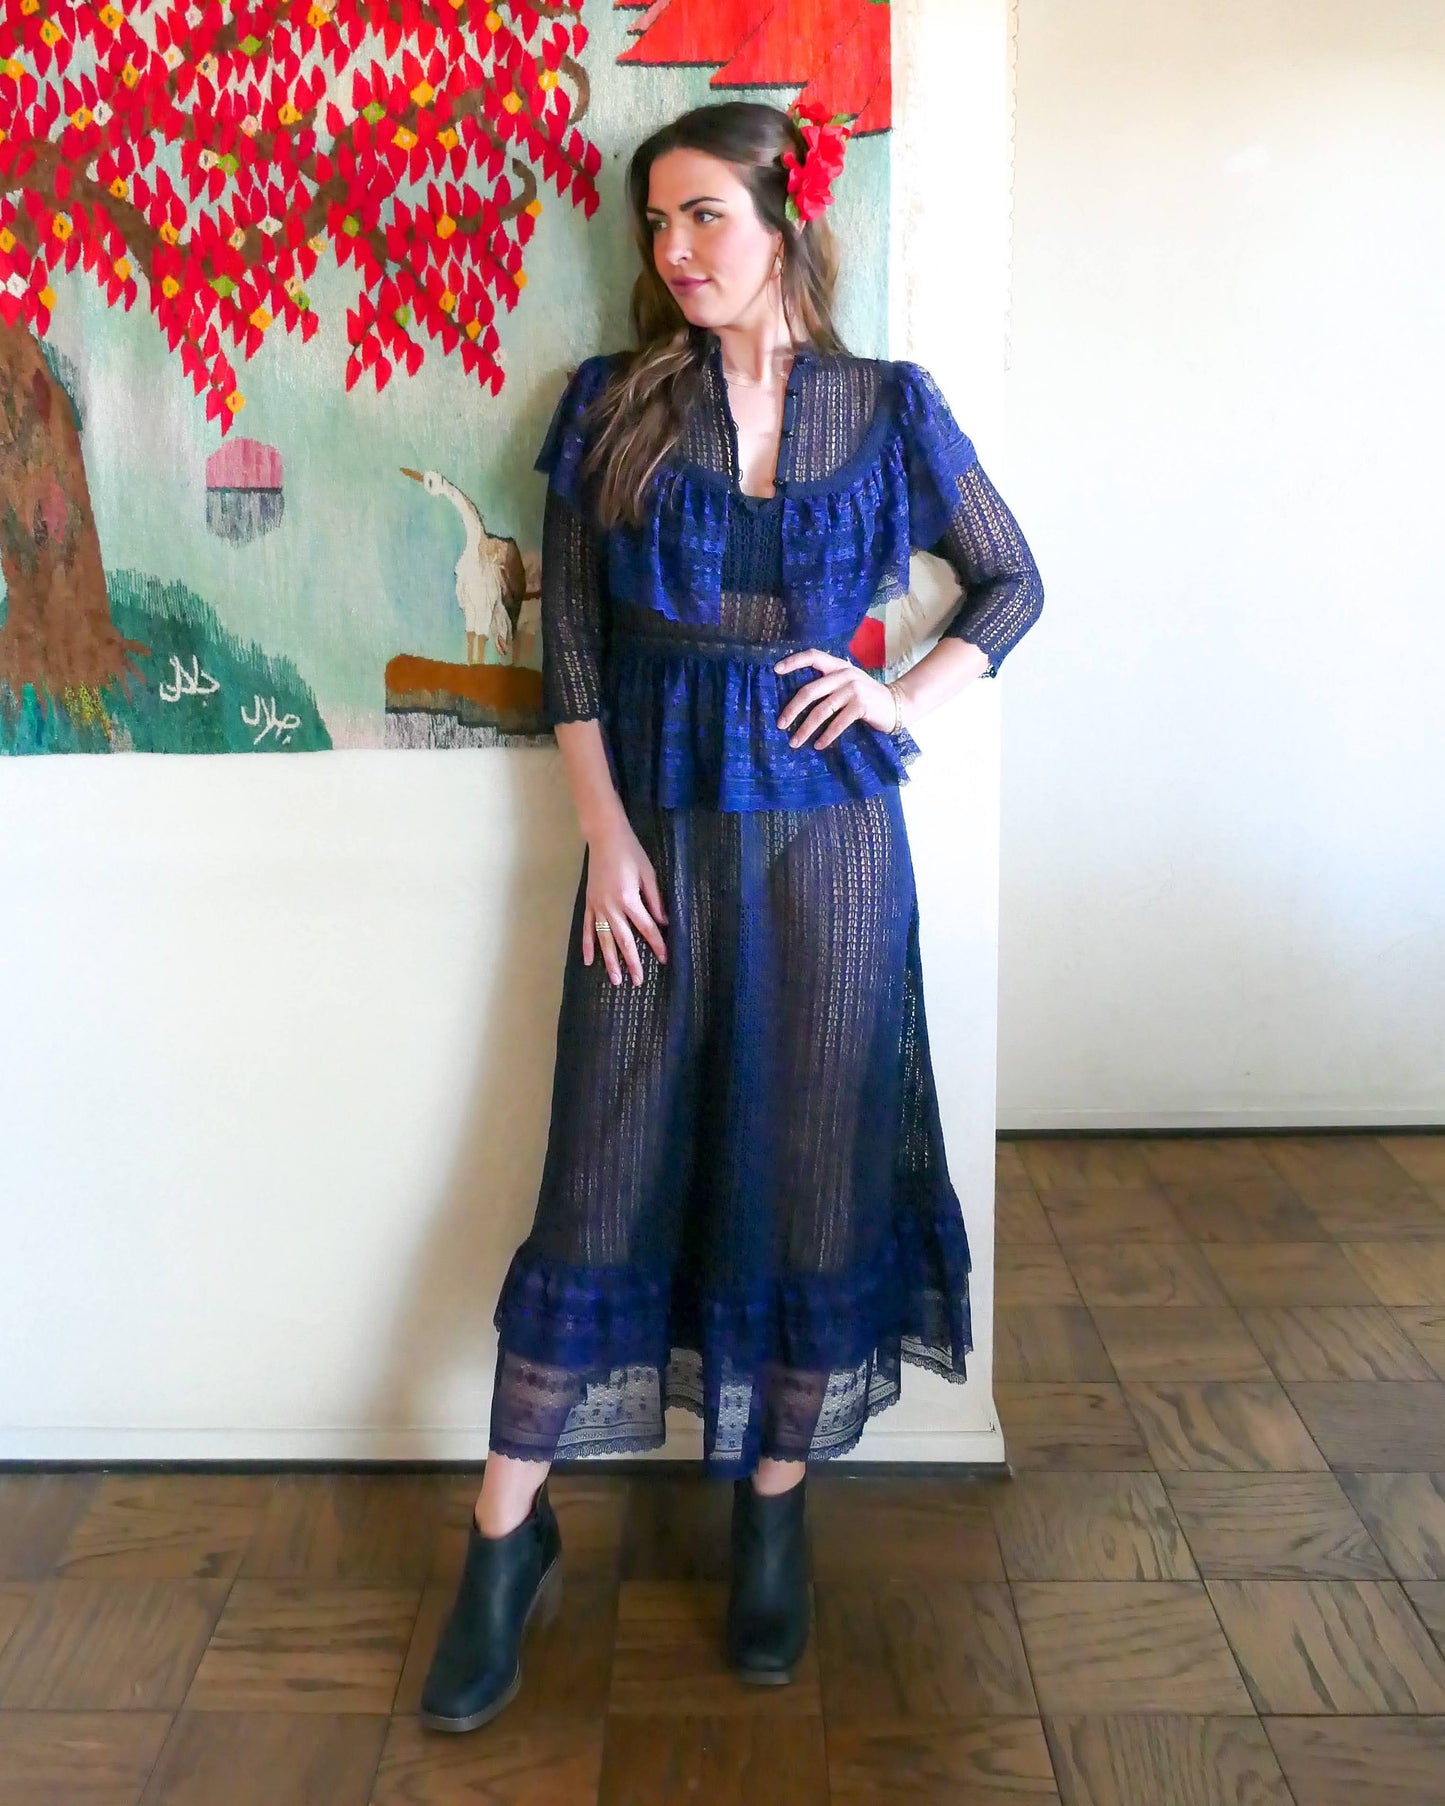 Worn with buttons in the front. A sultry indigo blue Victorian style crochet maxi dress with lace trim and elastic waist. Can be worn with the buttons going down the front or back. Wear with a slip and high black boots for a dramatic evening look.  Size: Fits small to medium   Measurements:  Bust 31"-36” Waist 26”- 34" Length 52” Shoulder width 15” Sleeve 18” Hip 46"